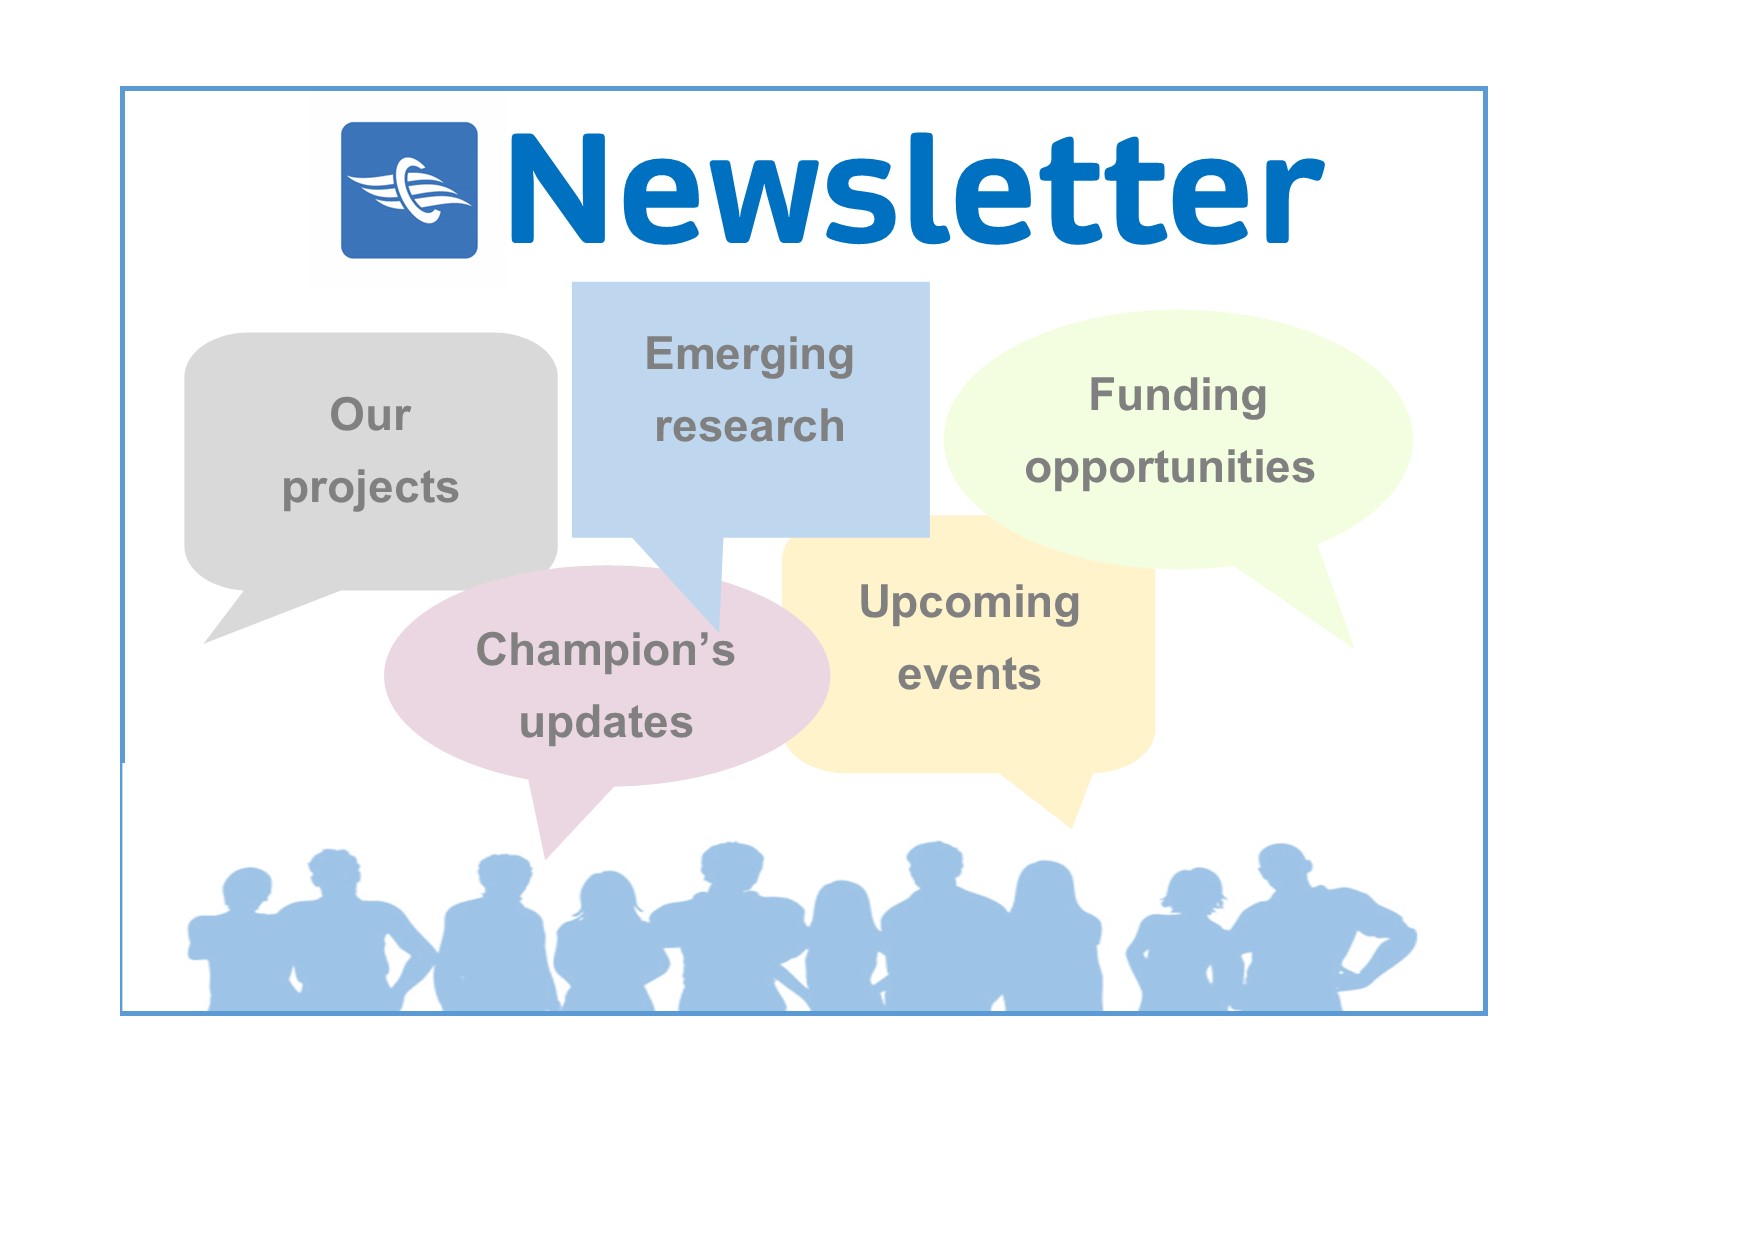 Clean Air Programme - Newsletter - February 2023 - Our projects, emerging research, funding opportunities, champions' updates & upcoming events.